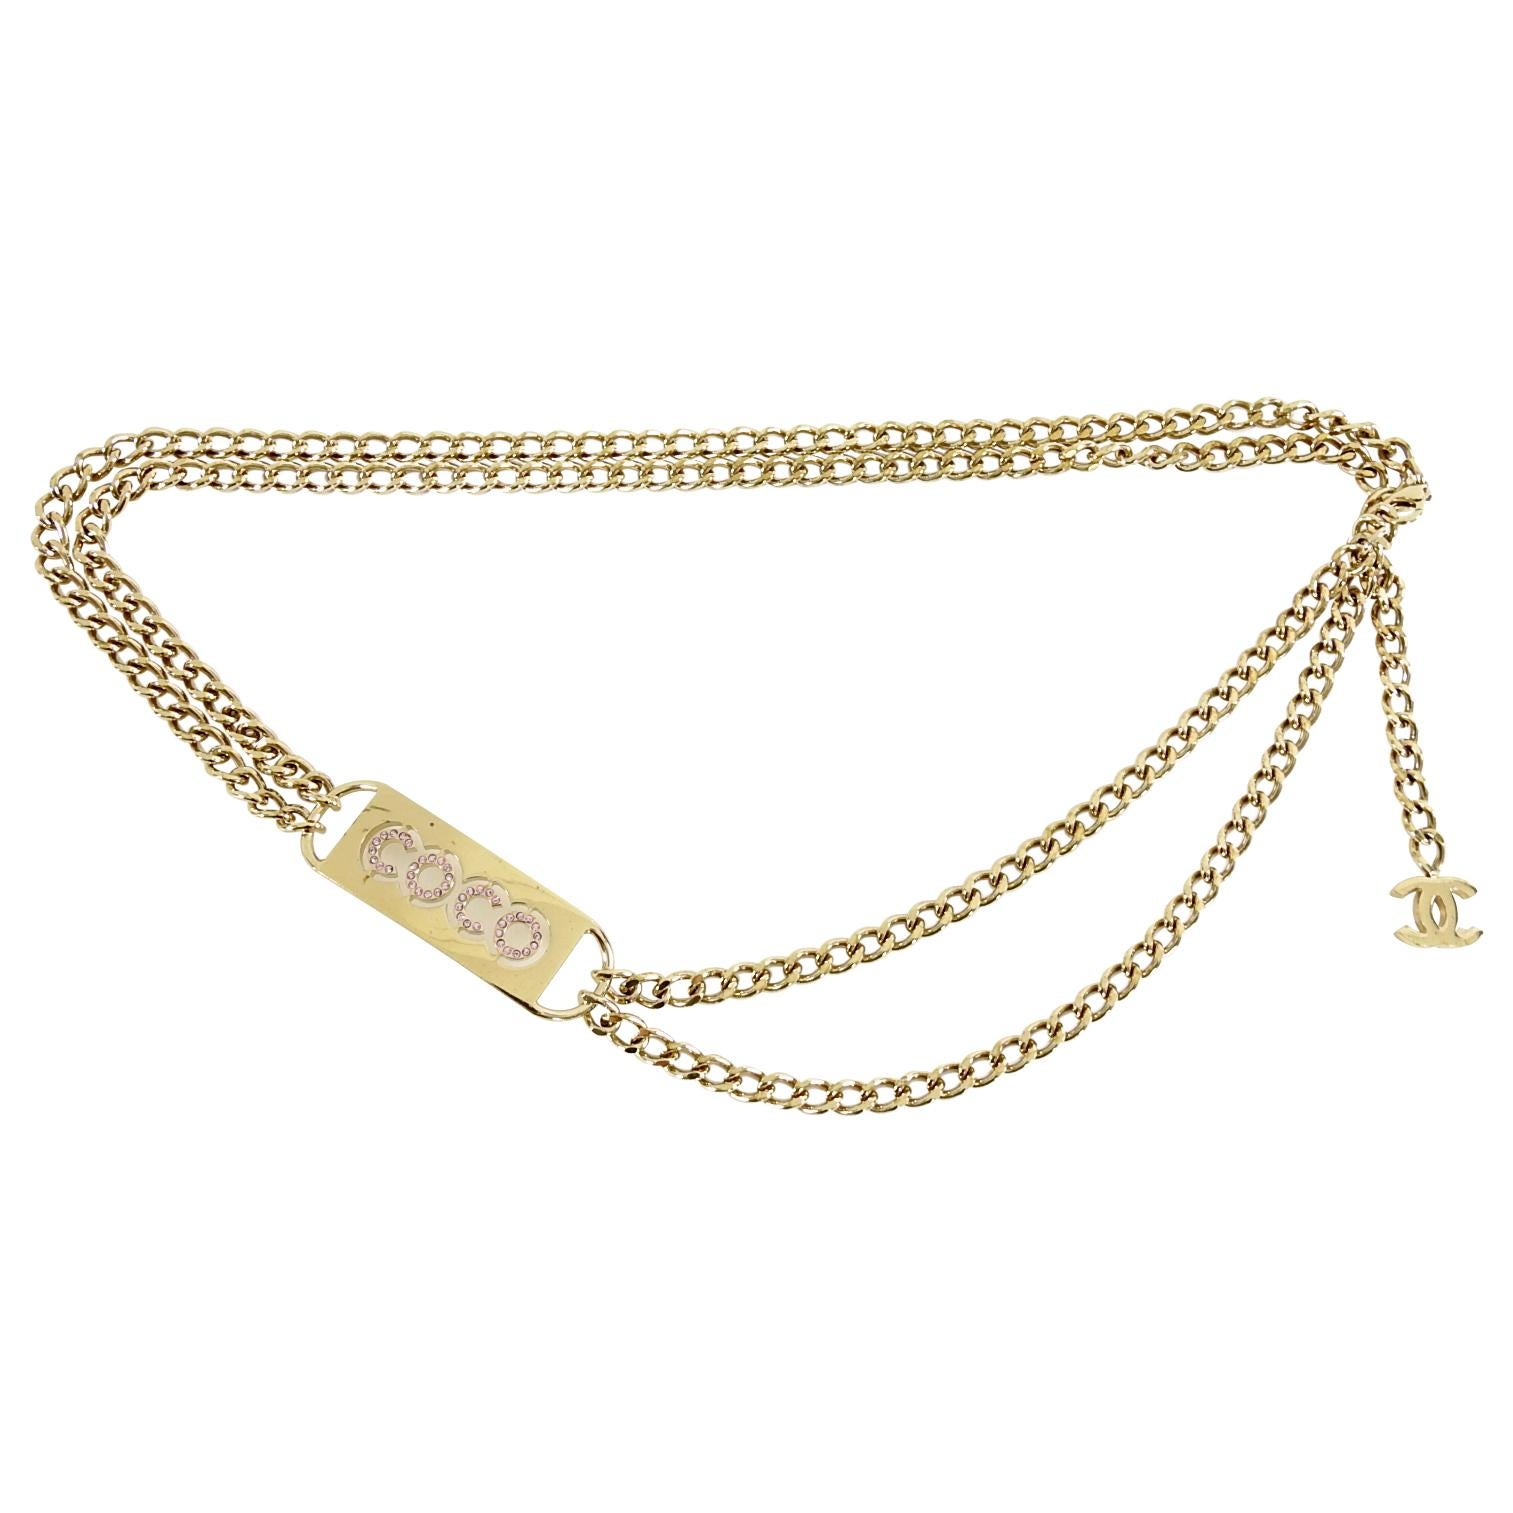 Women's Chanel Vintage 1995 P Gold Chain Belt with Coin Drop